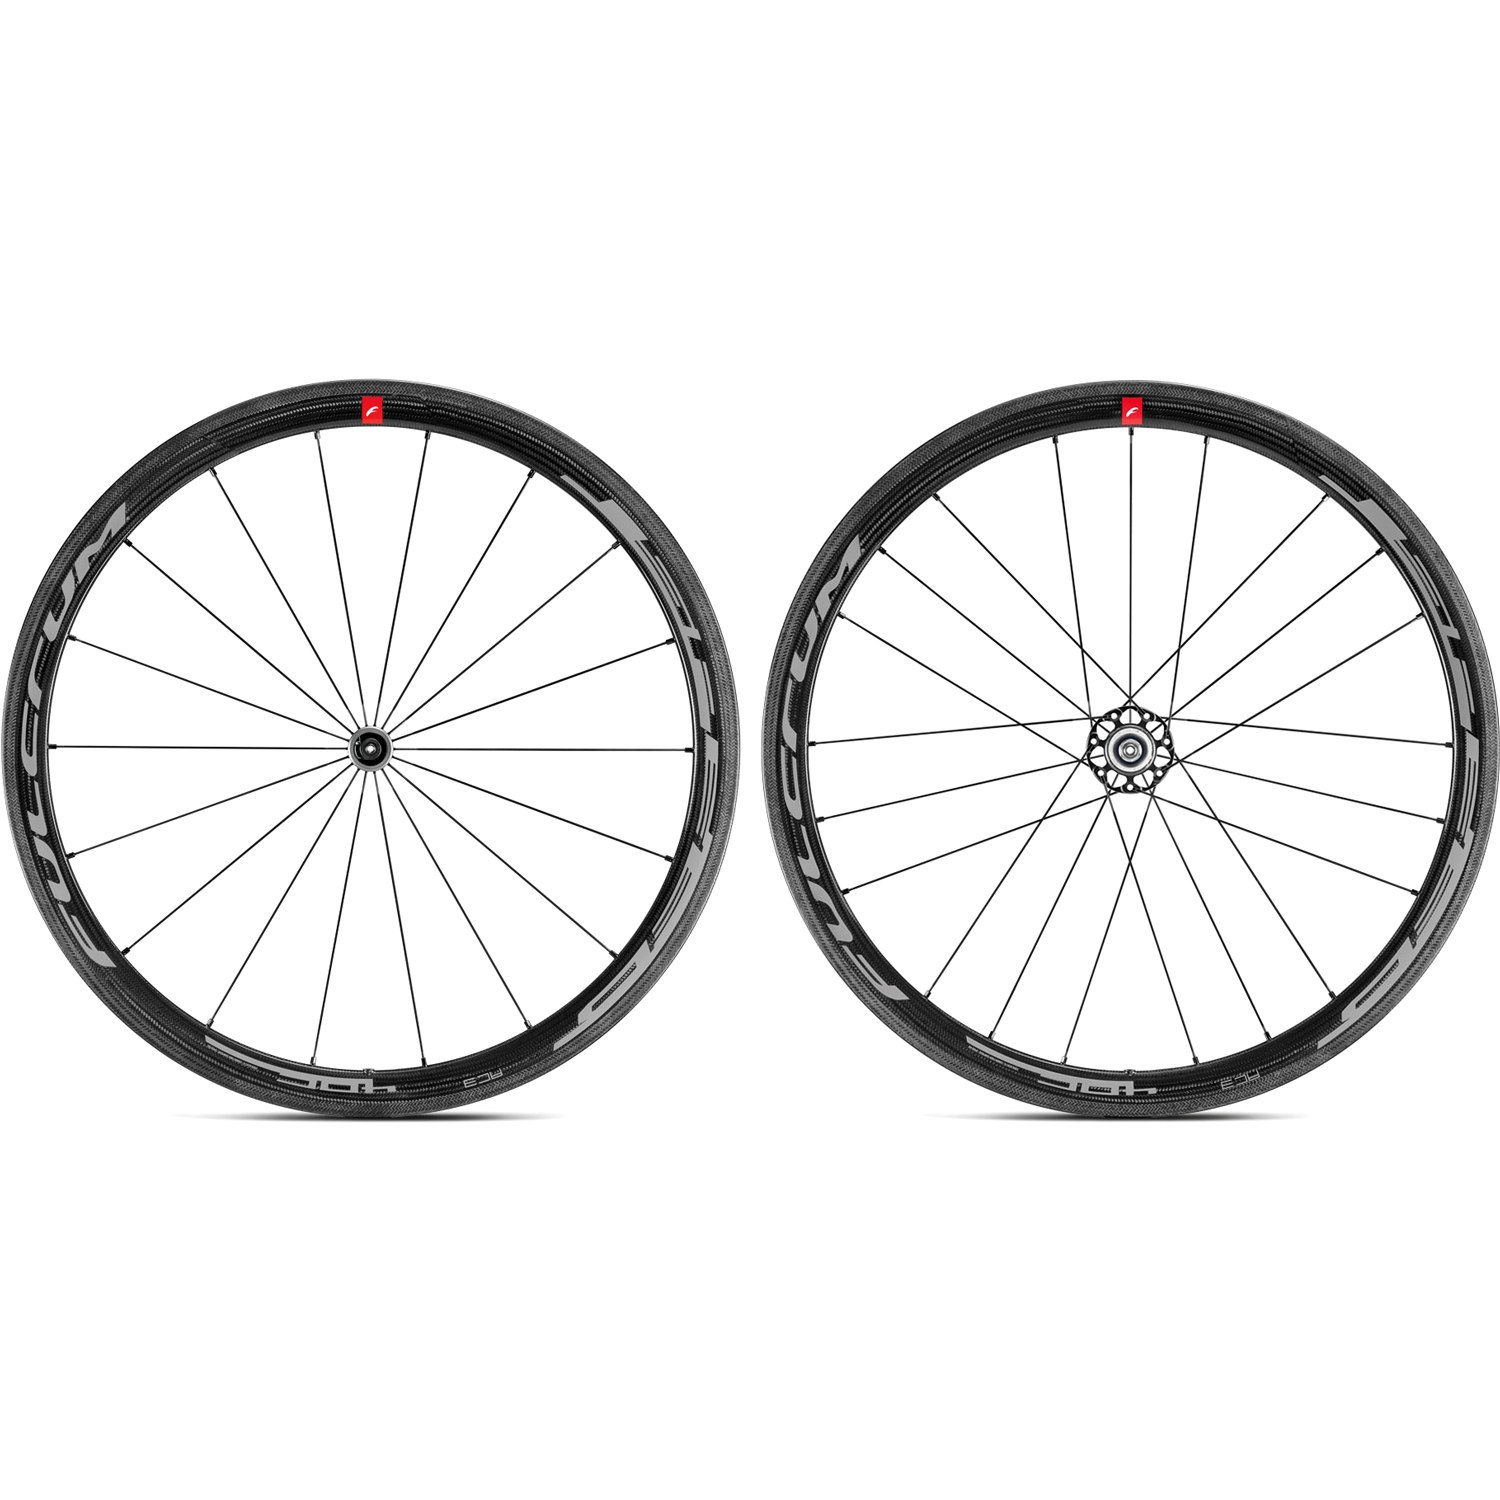 Picture of Fulcrum Speed 55C Carbon Wheelset Clincher - black